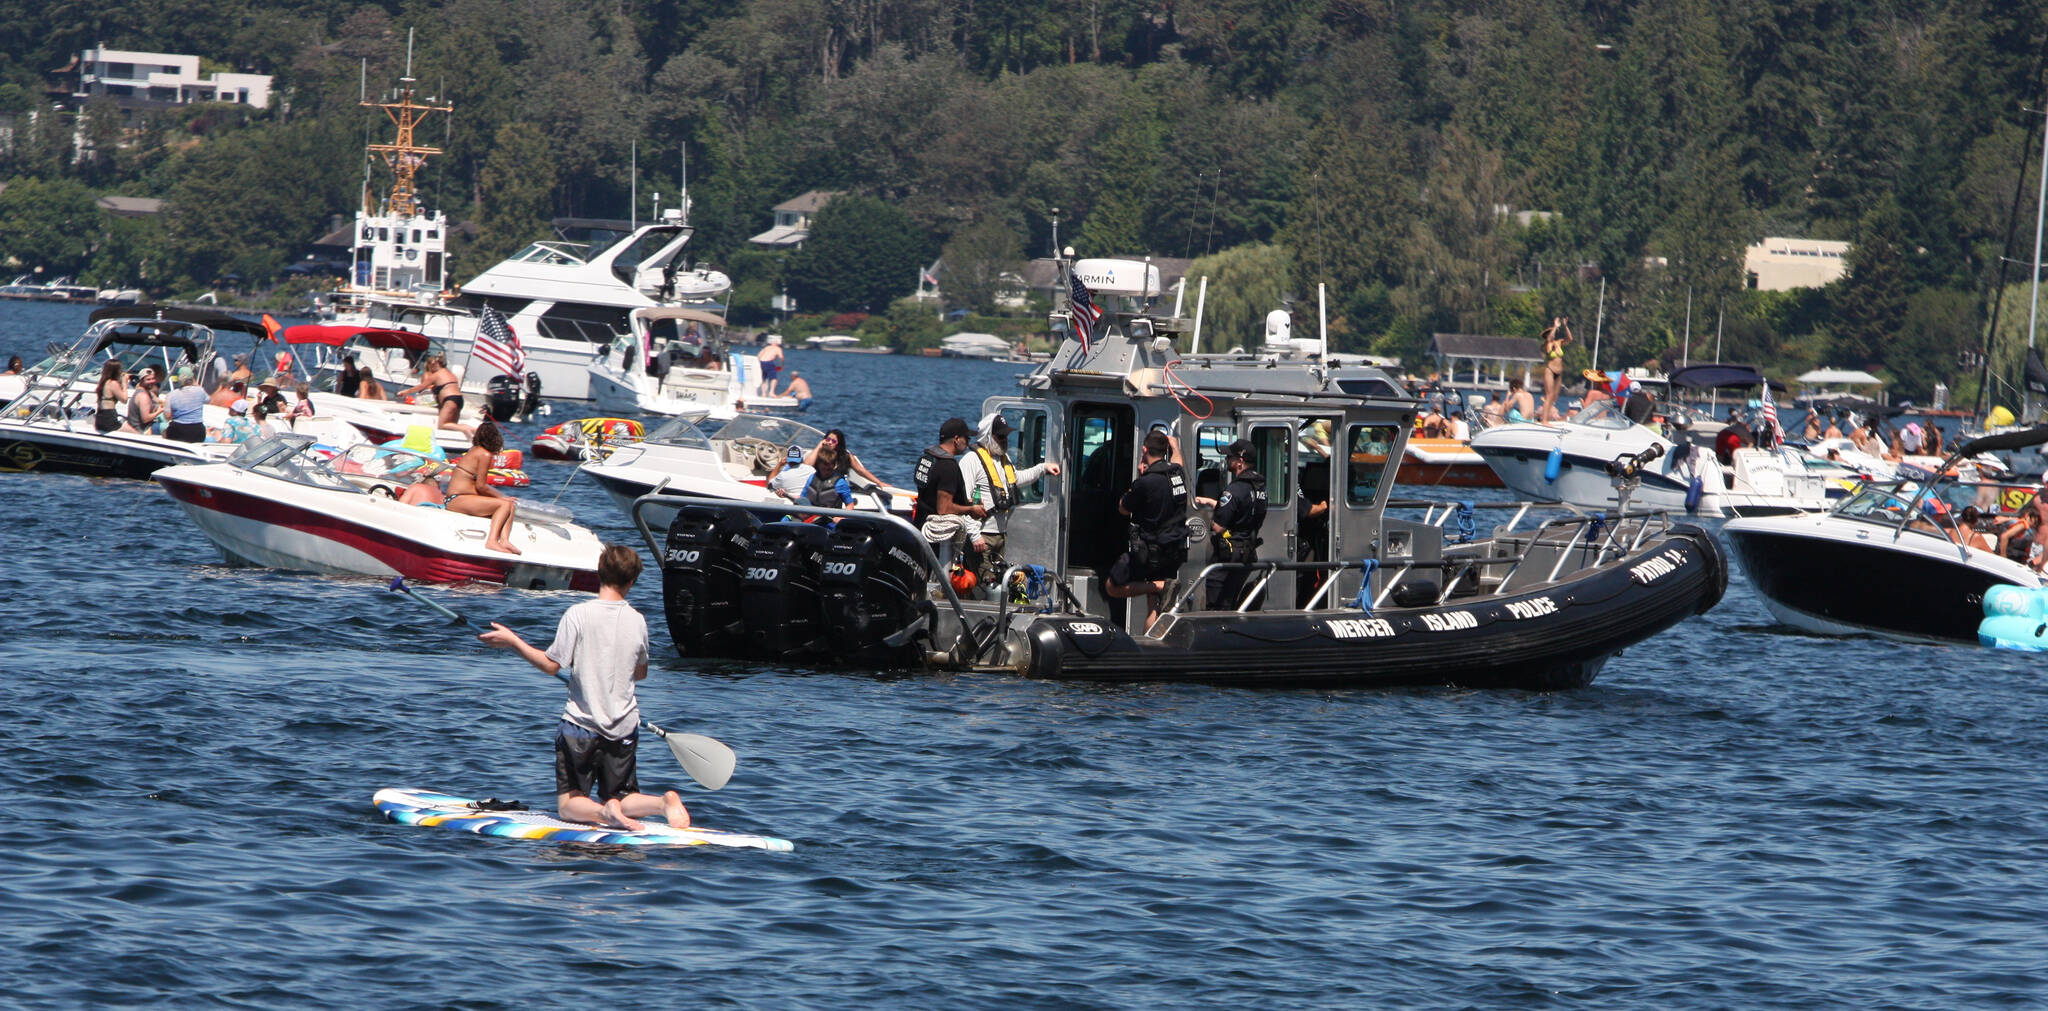 A Mercer Island Police Department Marine Patrol unit surveys the scene on Lake Washington during the Seafair Weekend festival on Aug. 7, 2022. Andy Nystrom/ staff photo